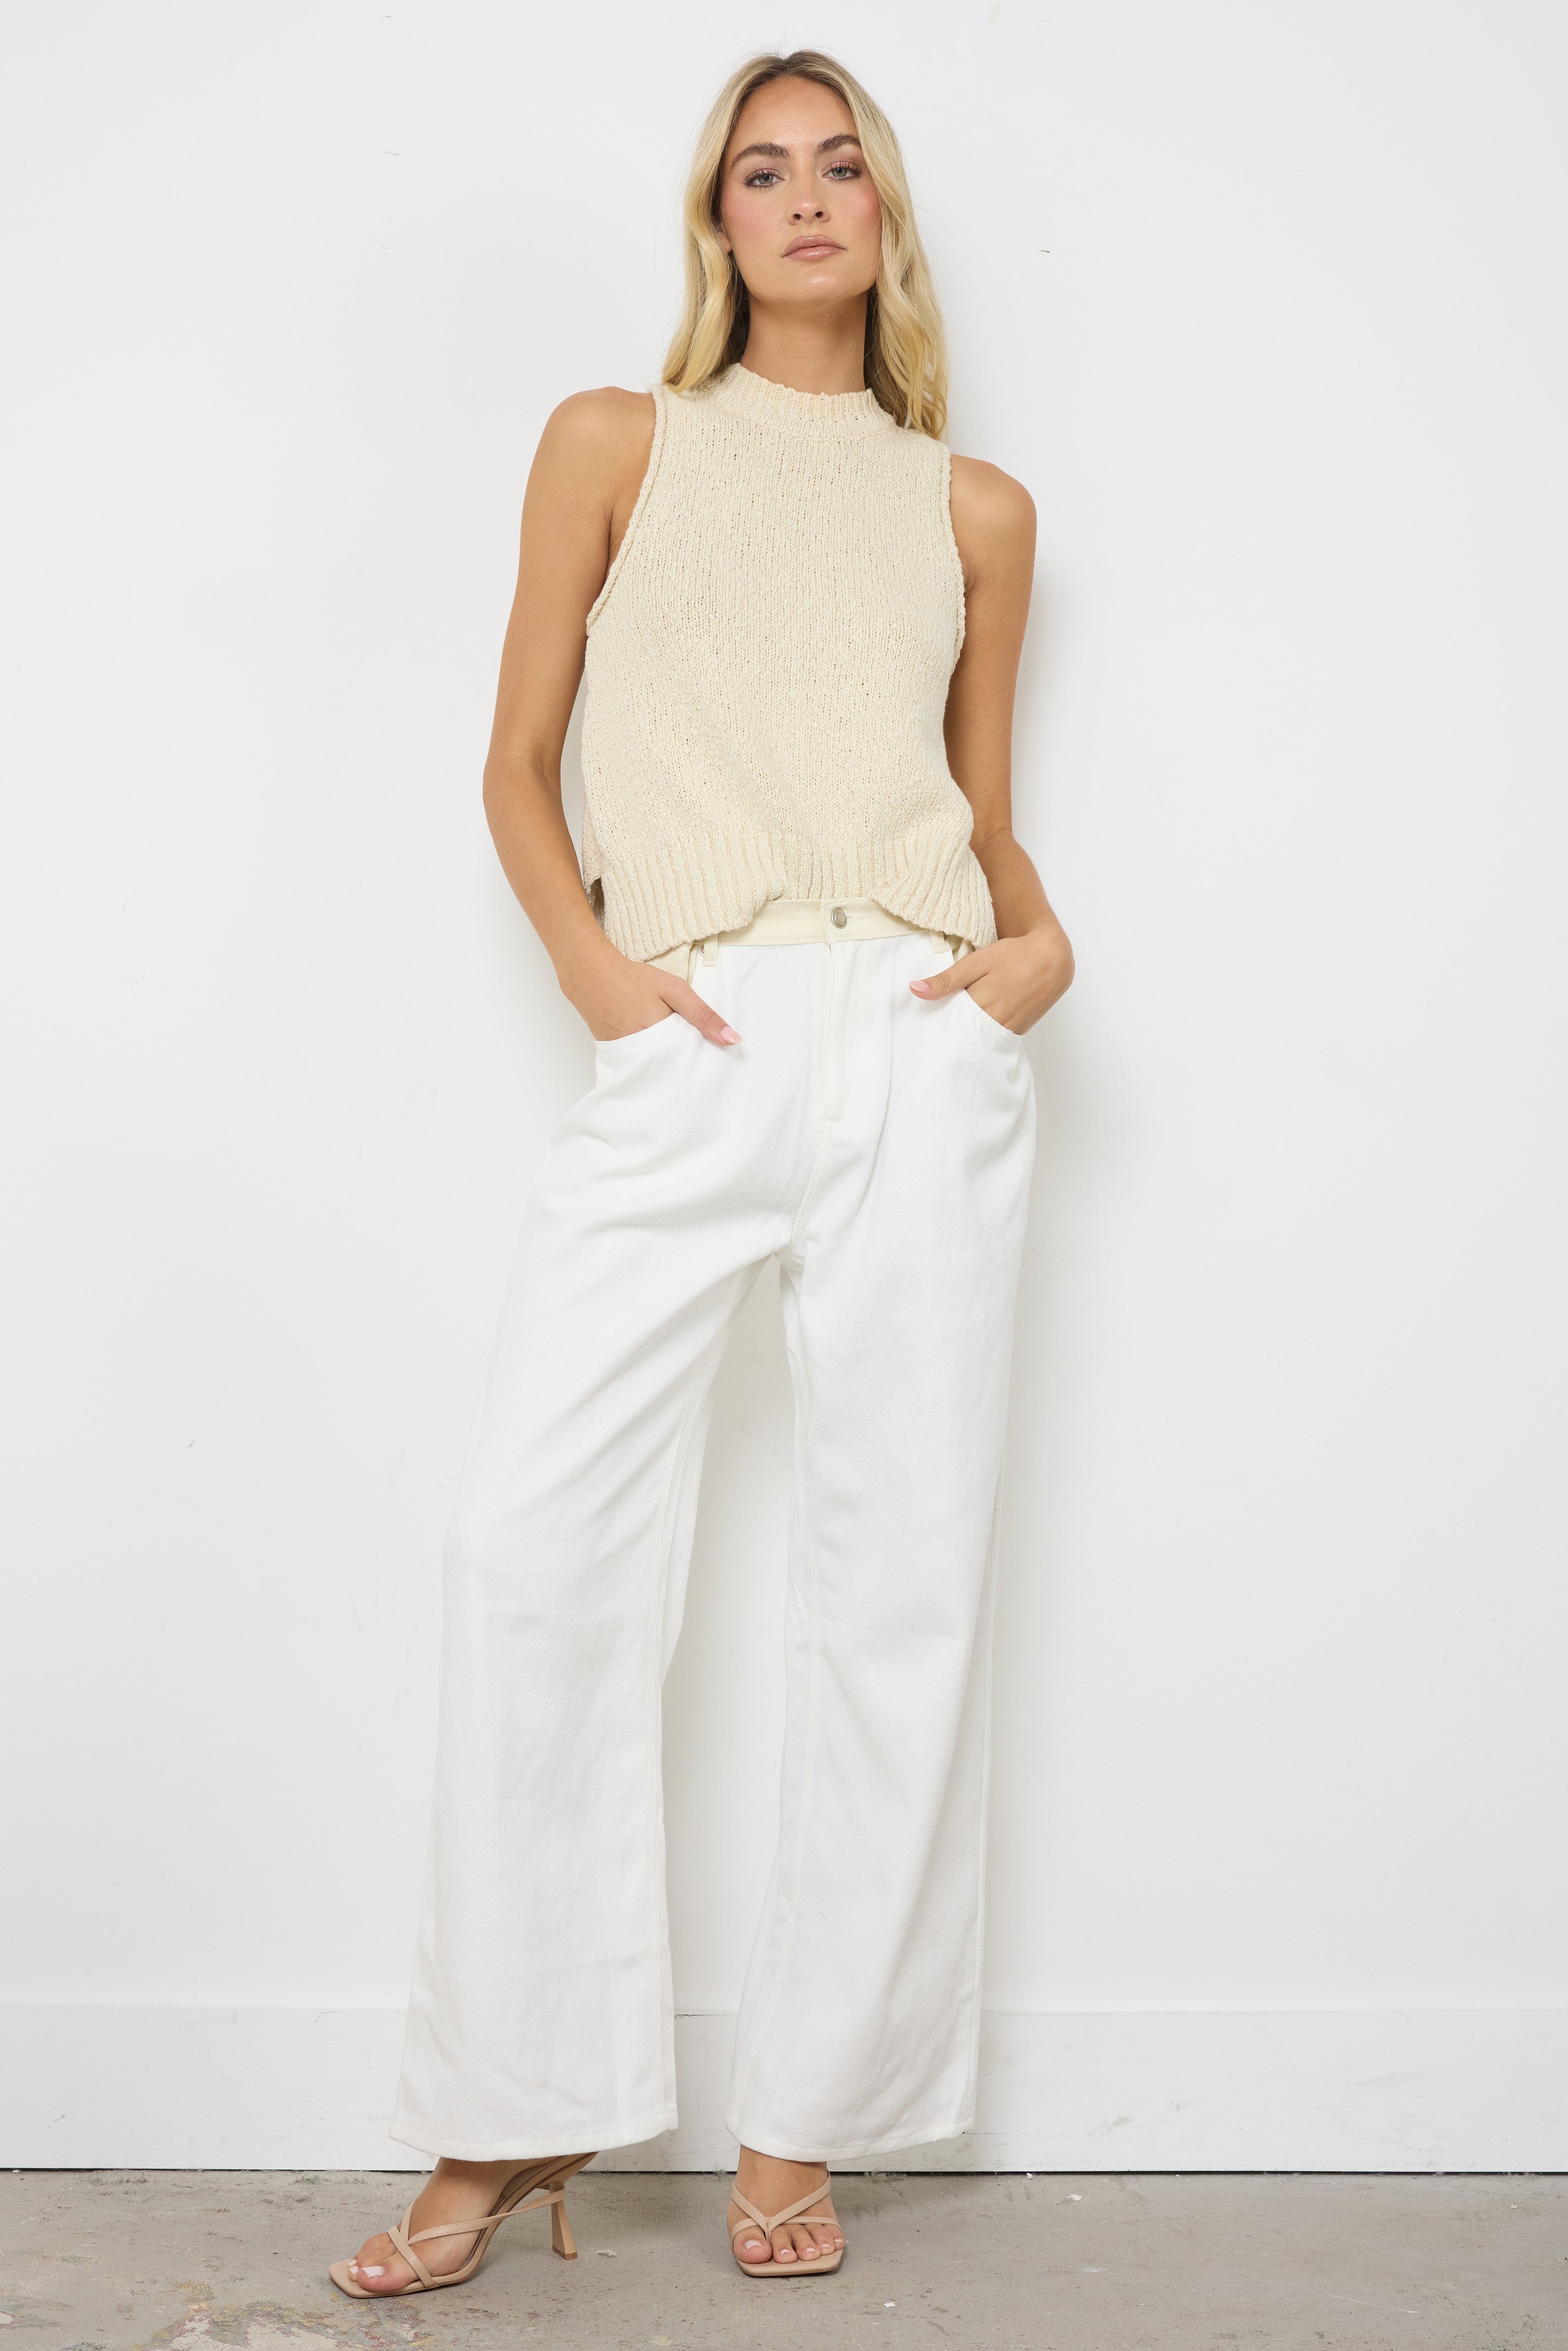 Carly Beige Knit Top